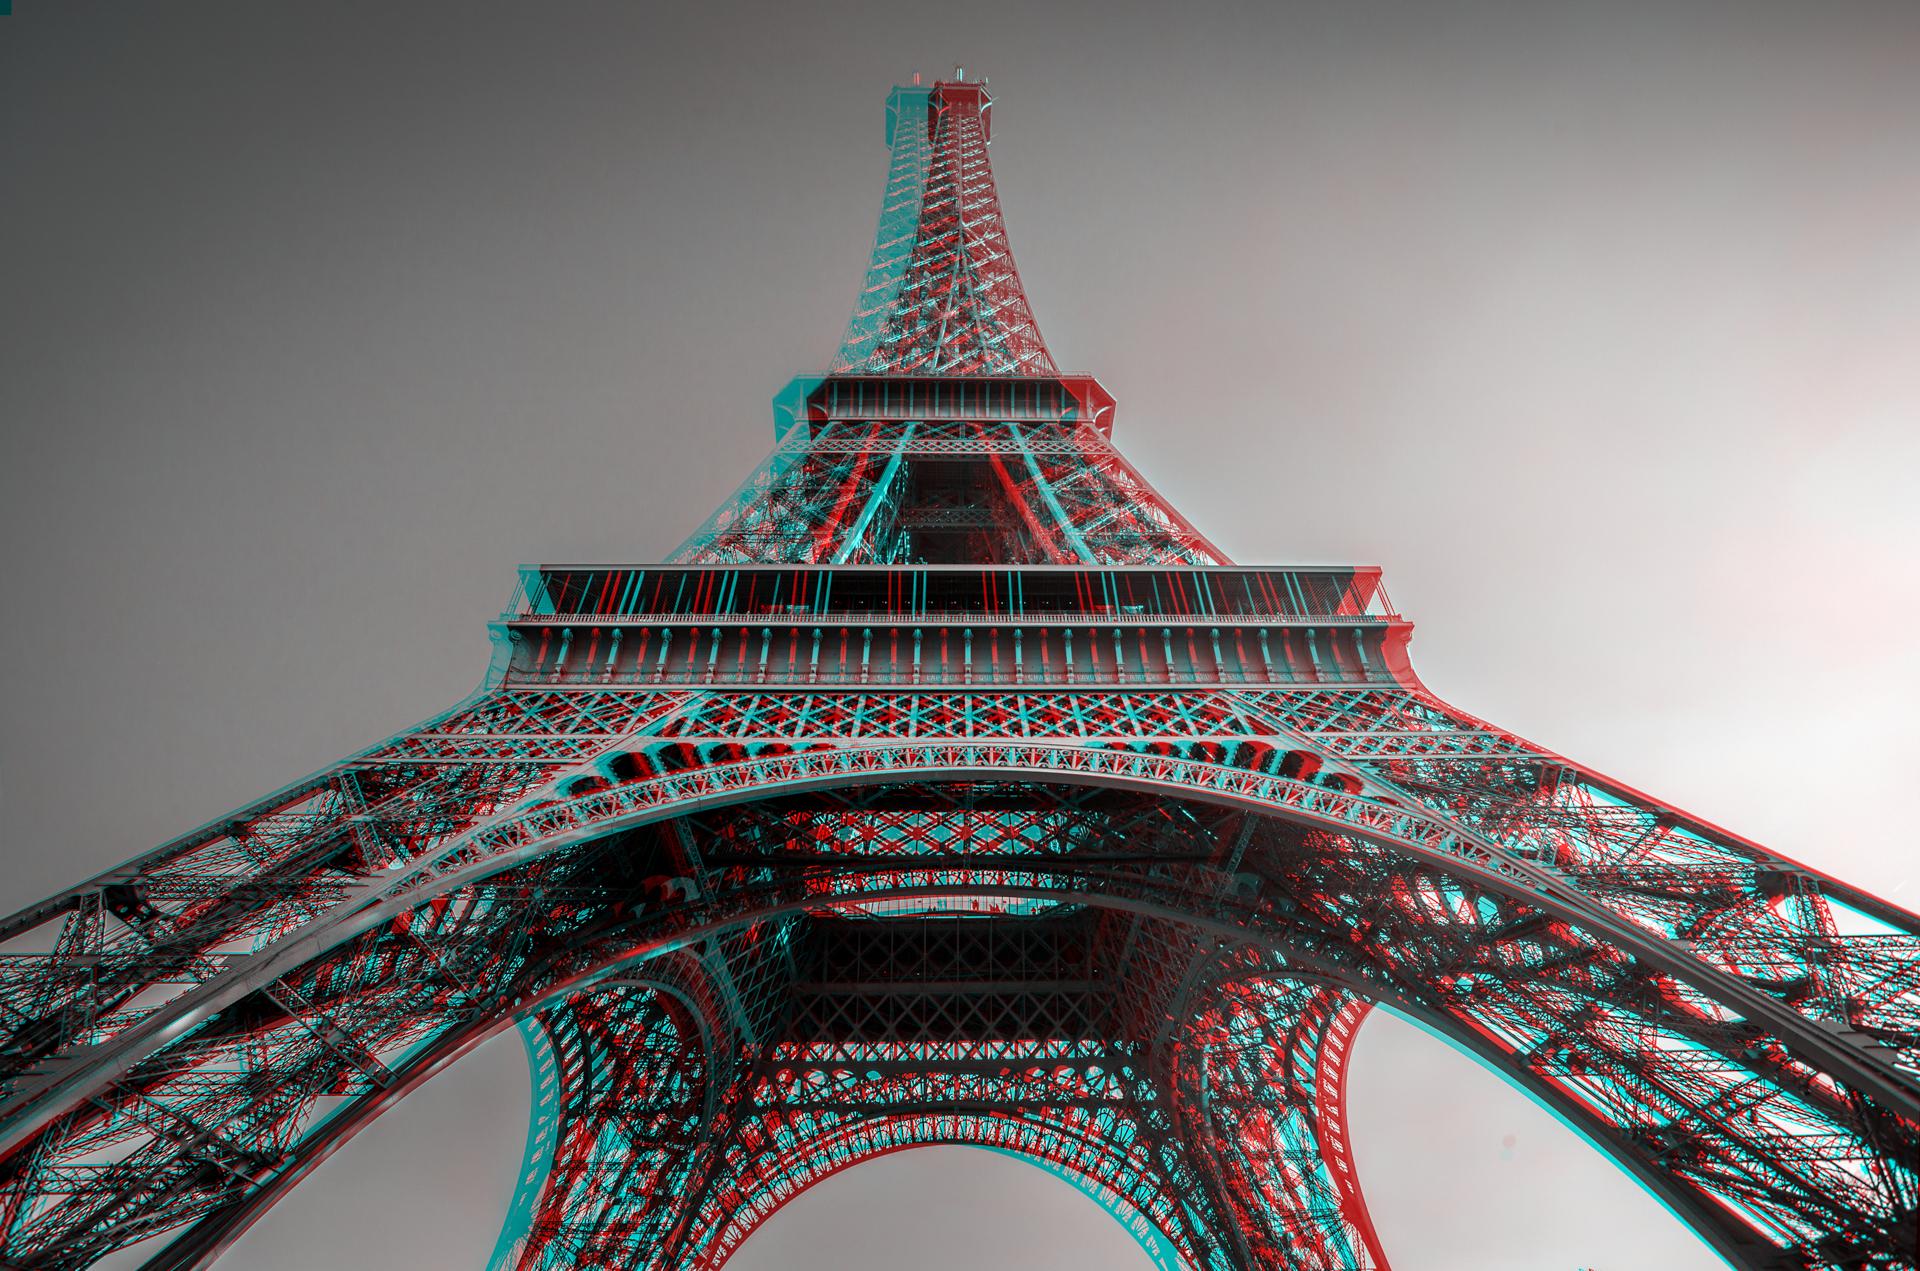 This is a 3D photo made by Alberto Fanelli, representing the Tour Eiffel, in Paris.
Born in Milan in 1965, at the age of 15 he is given his first reflex: a Yashica FX3. After attending classical high school studies he picks Computer Science at the